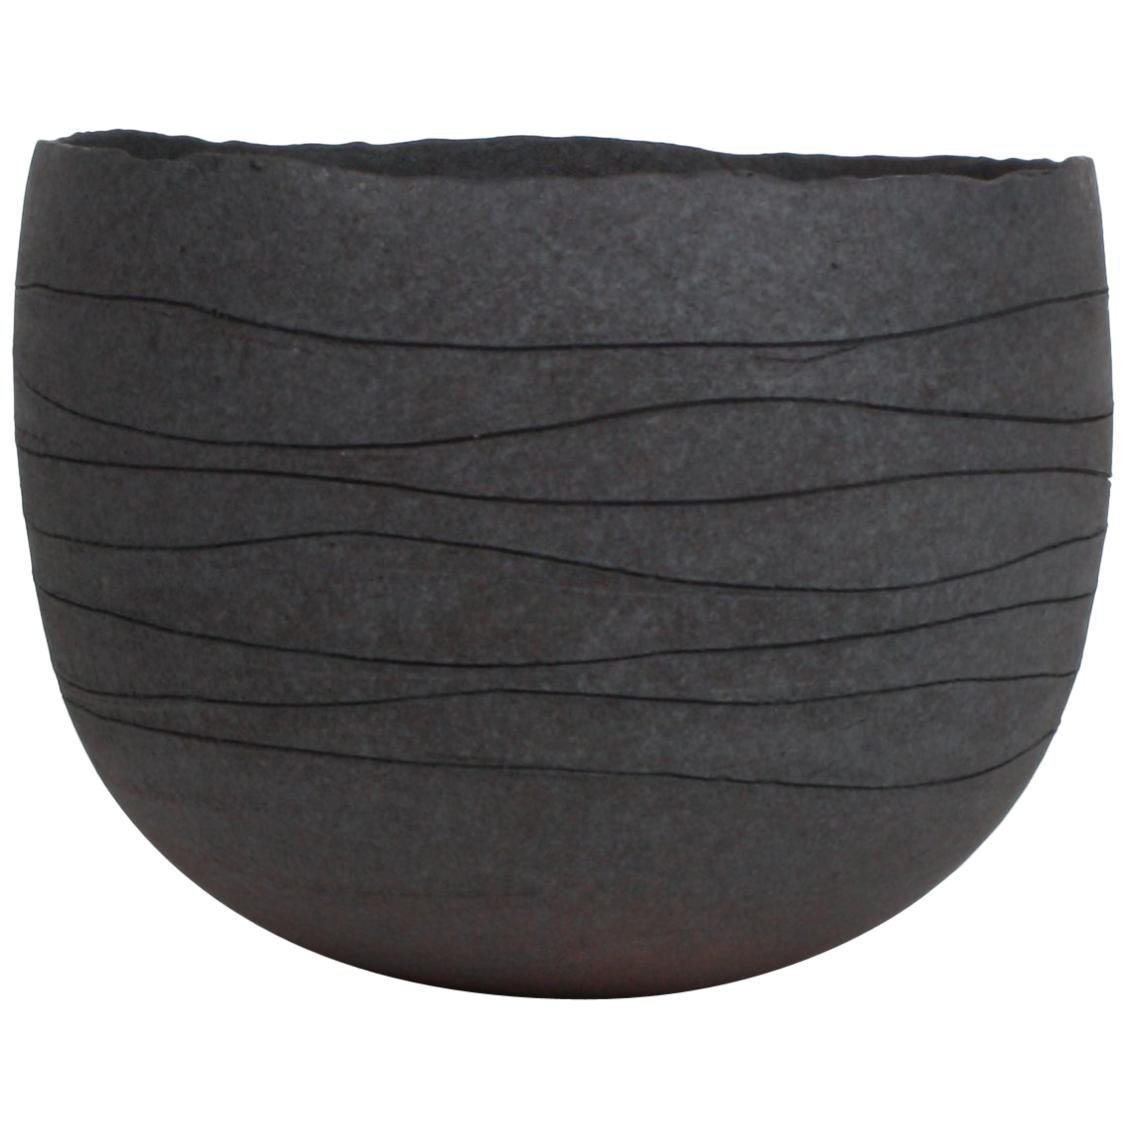 Contemporary Gray Stoneware Bowl, Hand Engraved by Artist Patricia Vieljeux